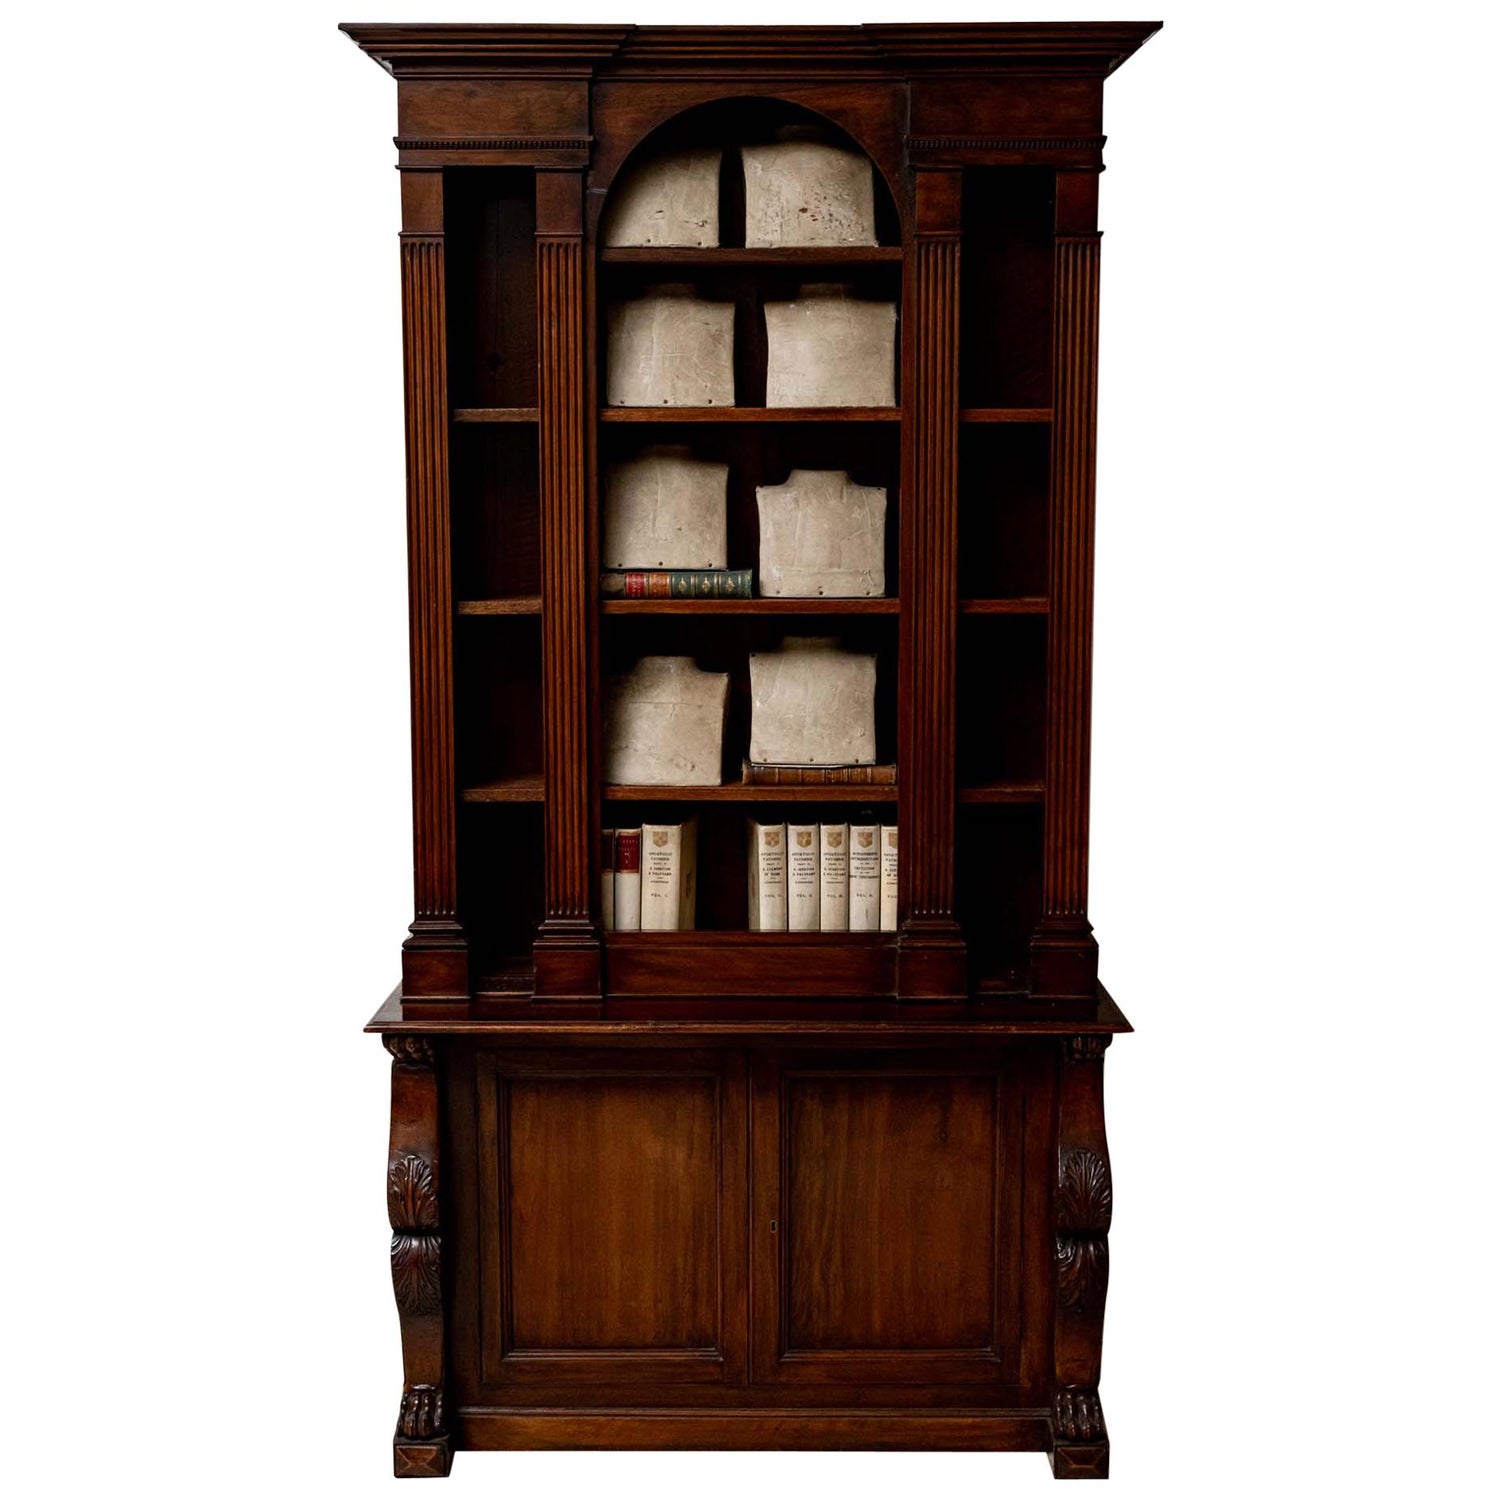 19th Century French Classical Mahogany Bookcase Cabinet Formerly A Gun Cabinet For Sale At 1stdibs